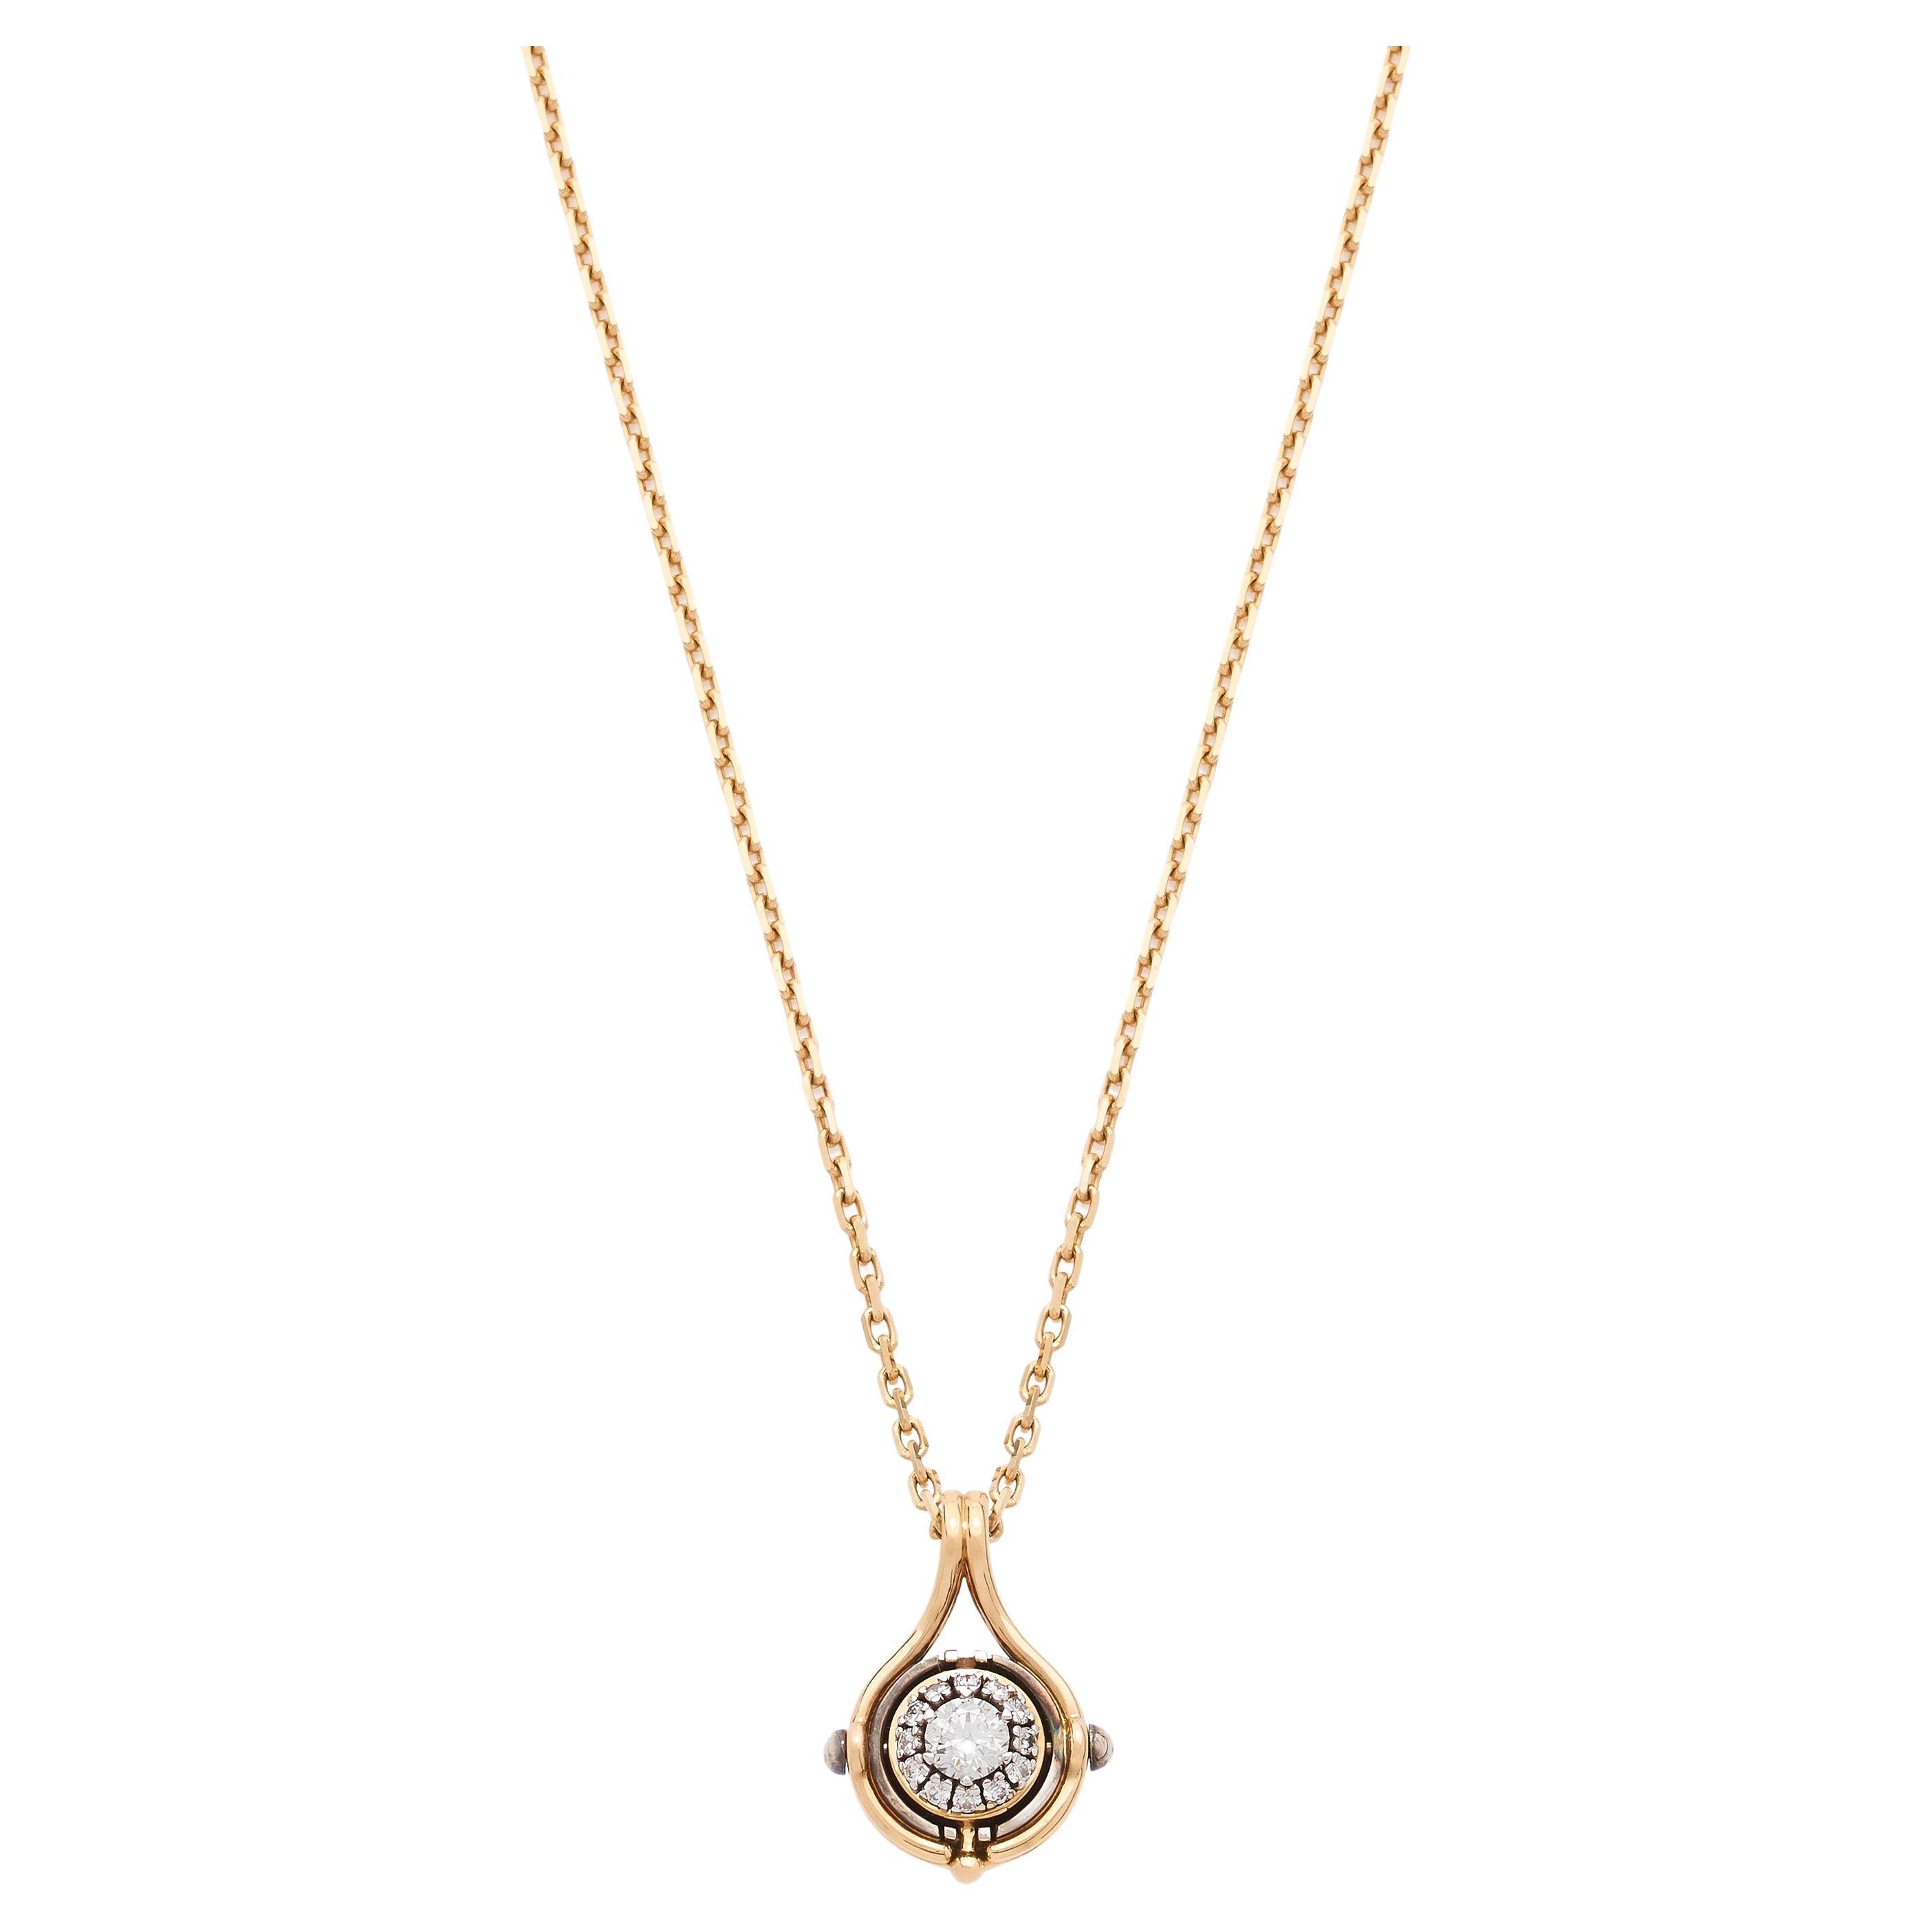 Mira Diamond Pendant in 18k Yellow Gold by Elie Top